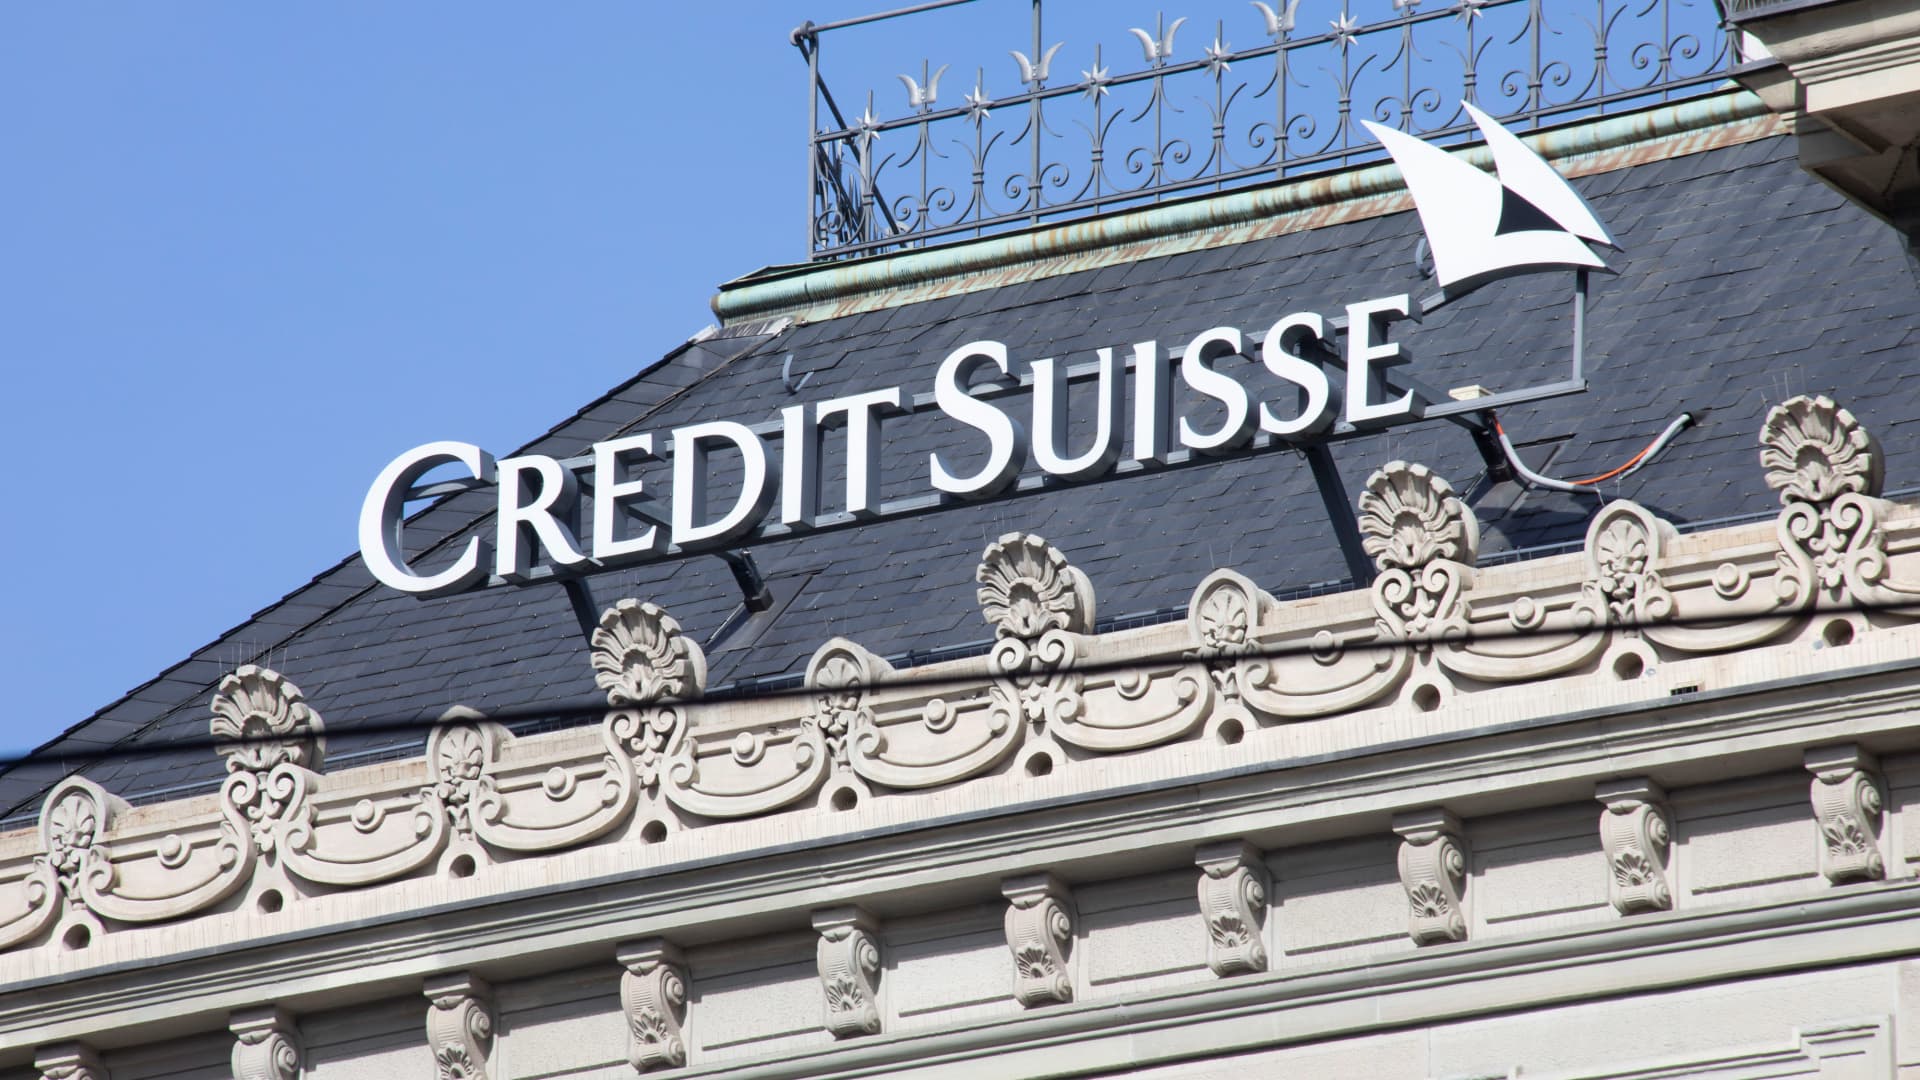 UBS buys Credit Suisse for .2 billion as regulators look to shore up the global banking system